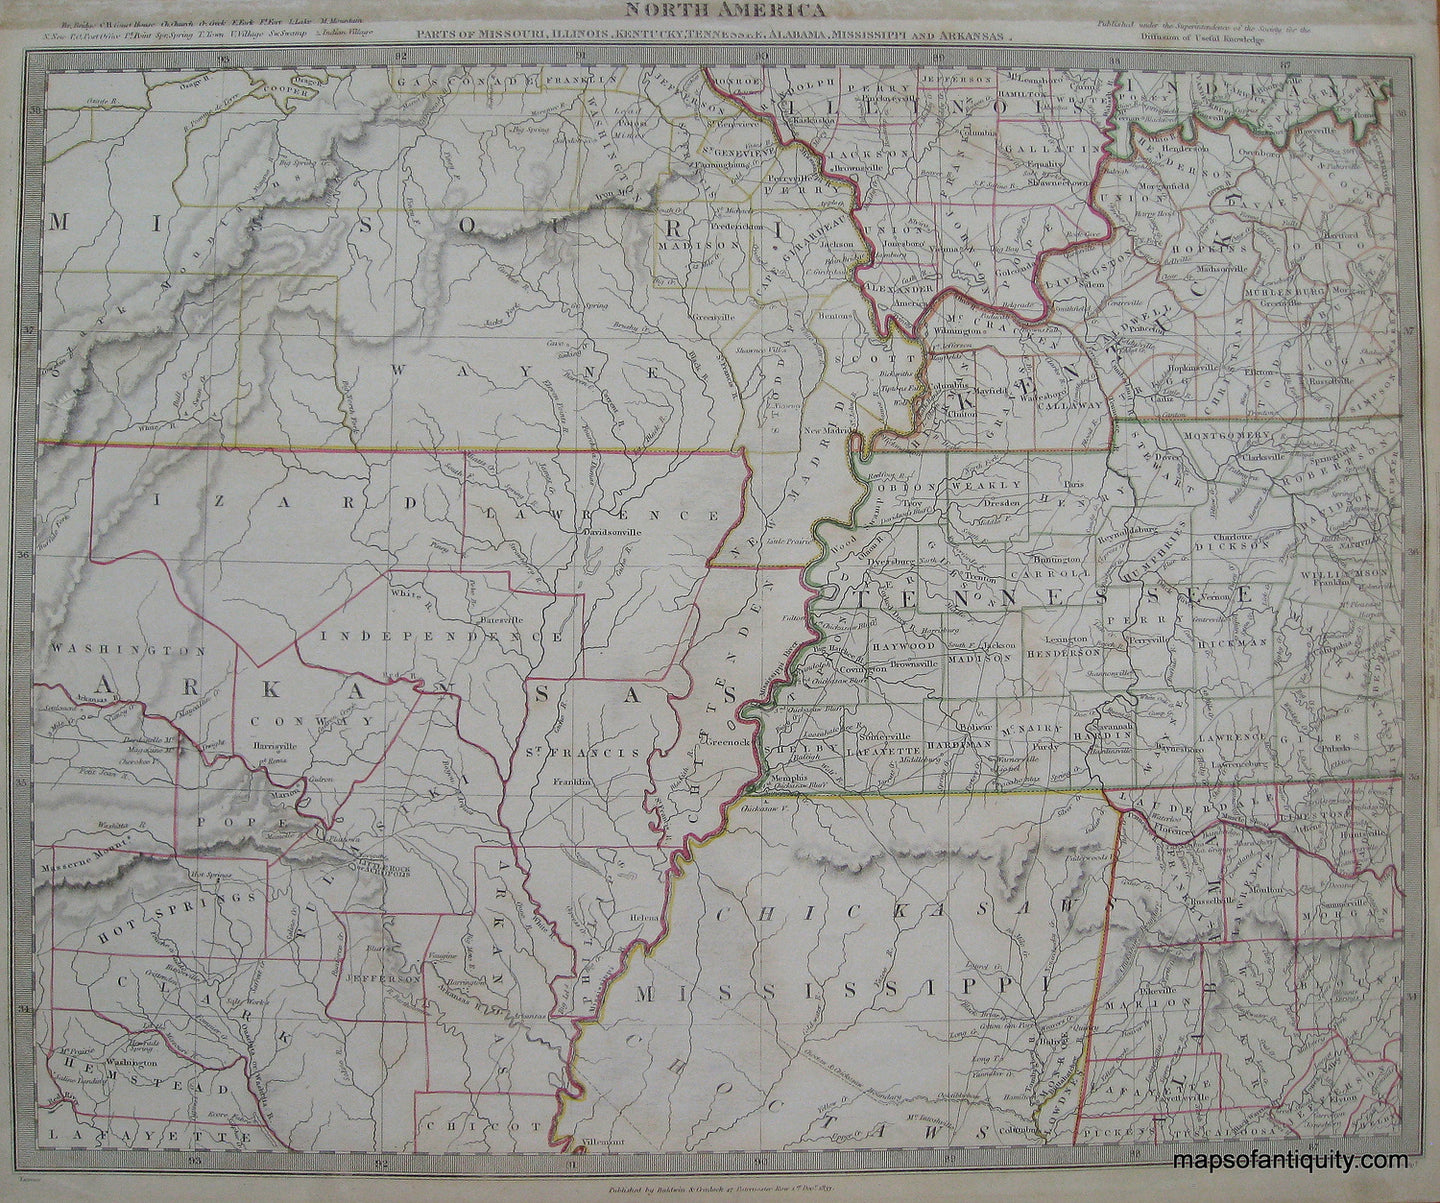 Antique-Hand-Colored-Map-Parts-of-Missouri-Illinois-Kentucky-Tennessee-Alabama-Mississippi-and-Arkansas-United-States-Midwest-1833-SDUK/-Society-for-the-Diffusion-of-Useful-Knowledge-Maps-Of-Antiquity